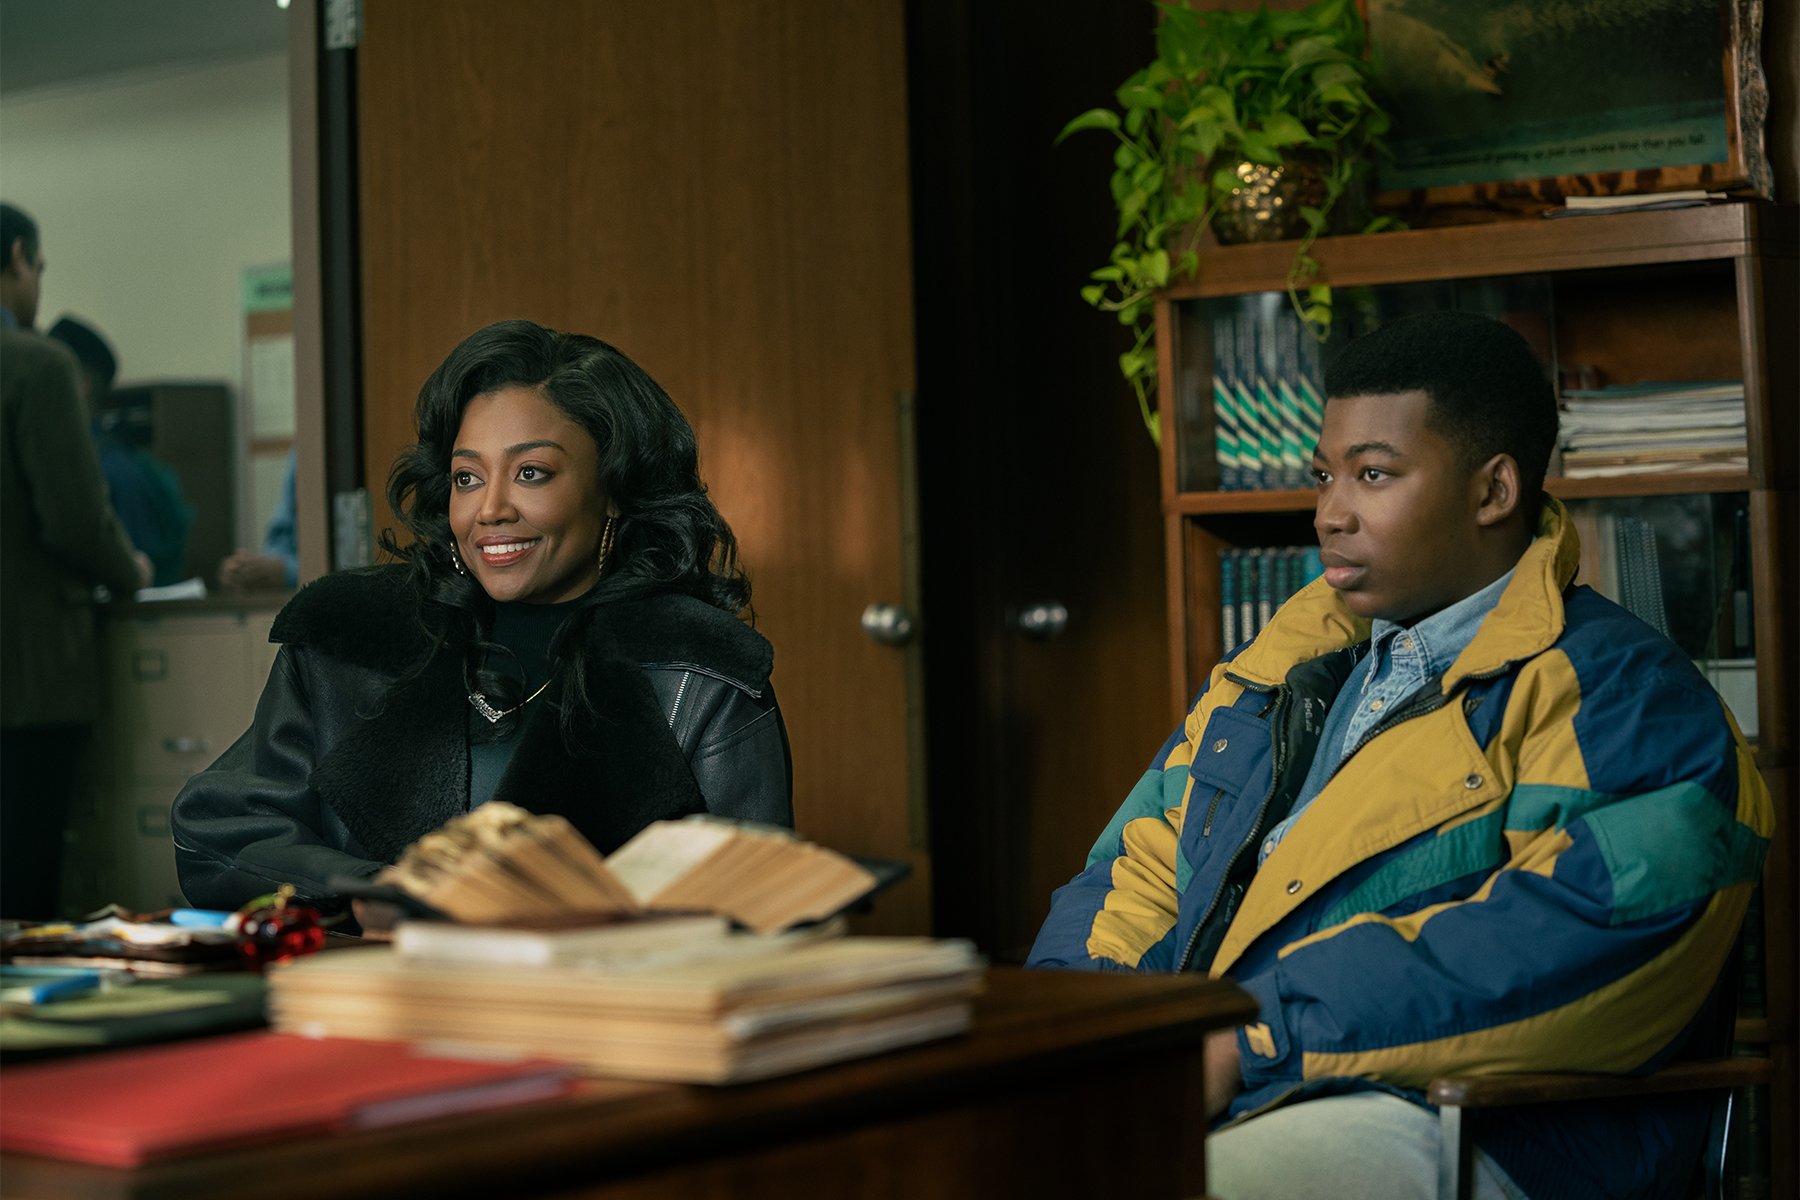 In a scene from ‘Power Book III: Raising Kanan,’ actors Patina Miller and Mekai Curtis sit side-by-side in front of a desk as their characters Raquel “Raq” Thomas and Kanan Stark.